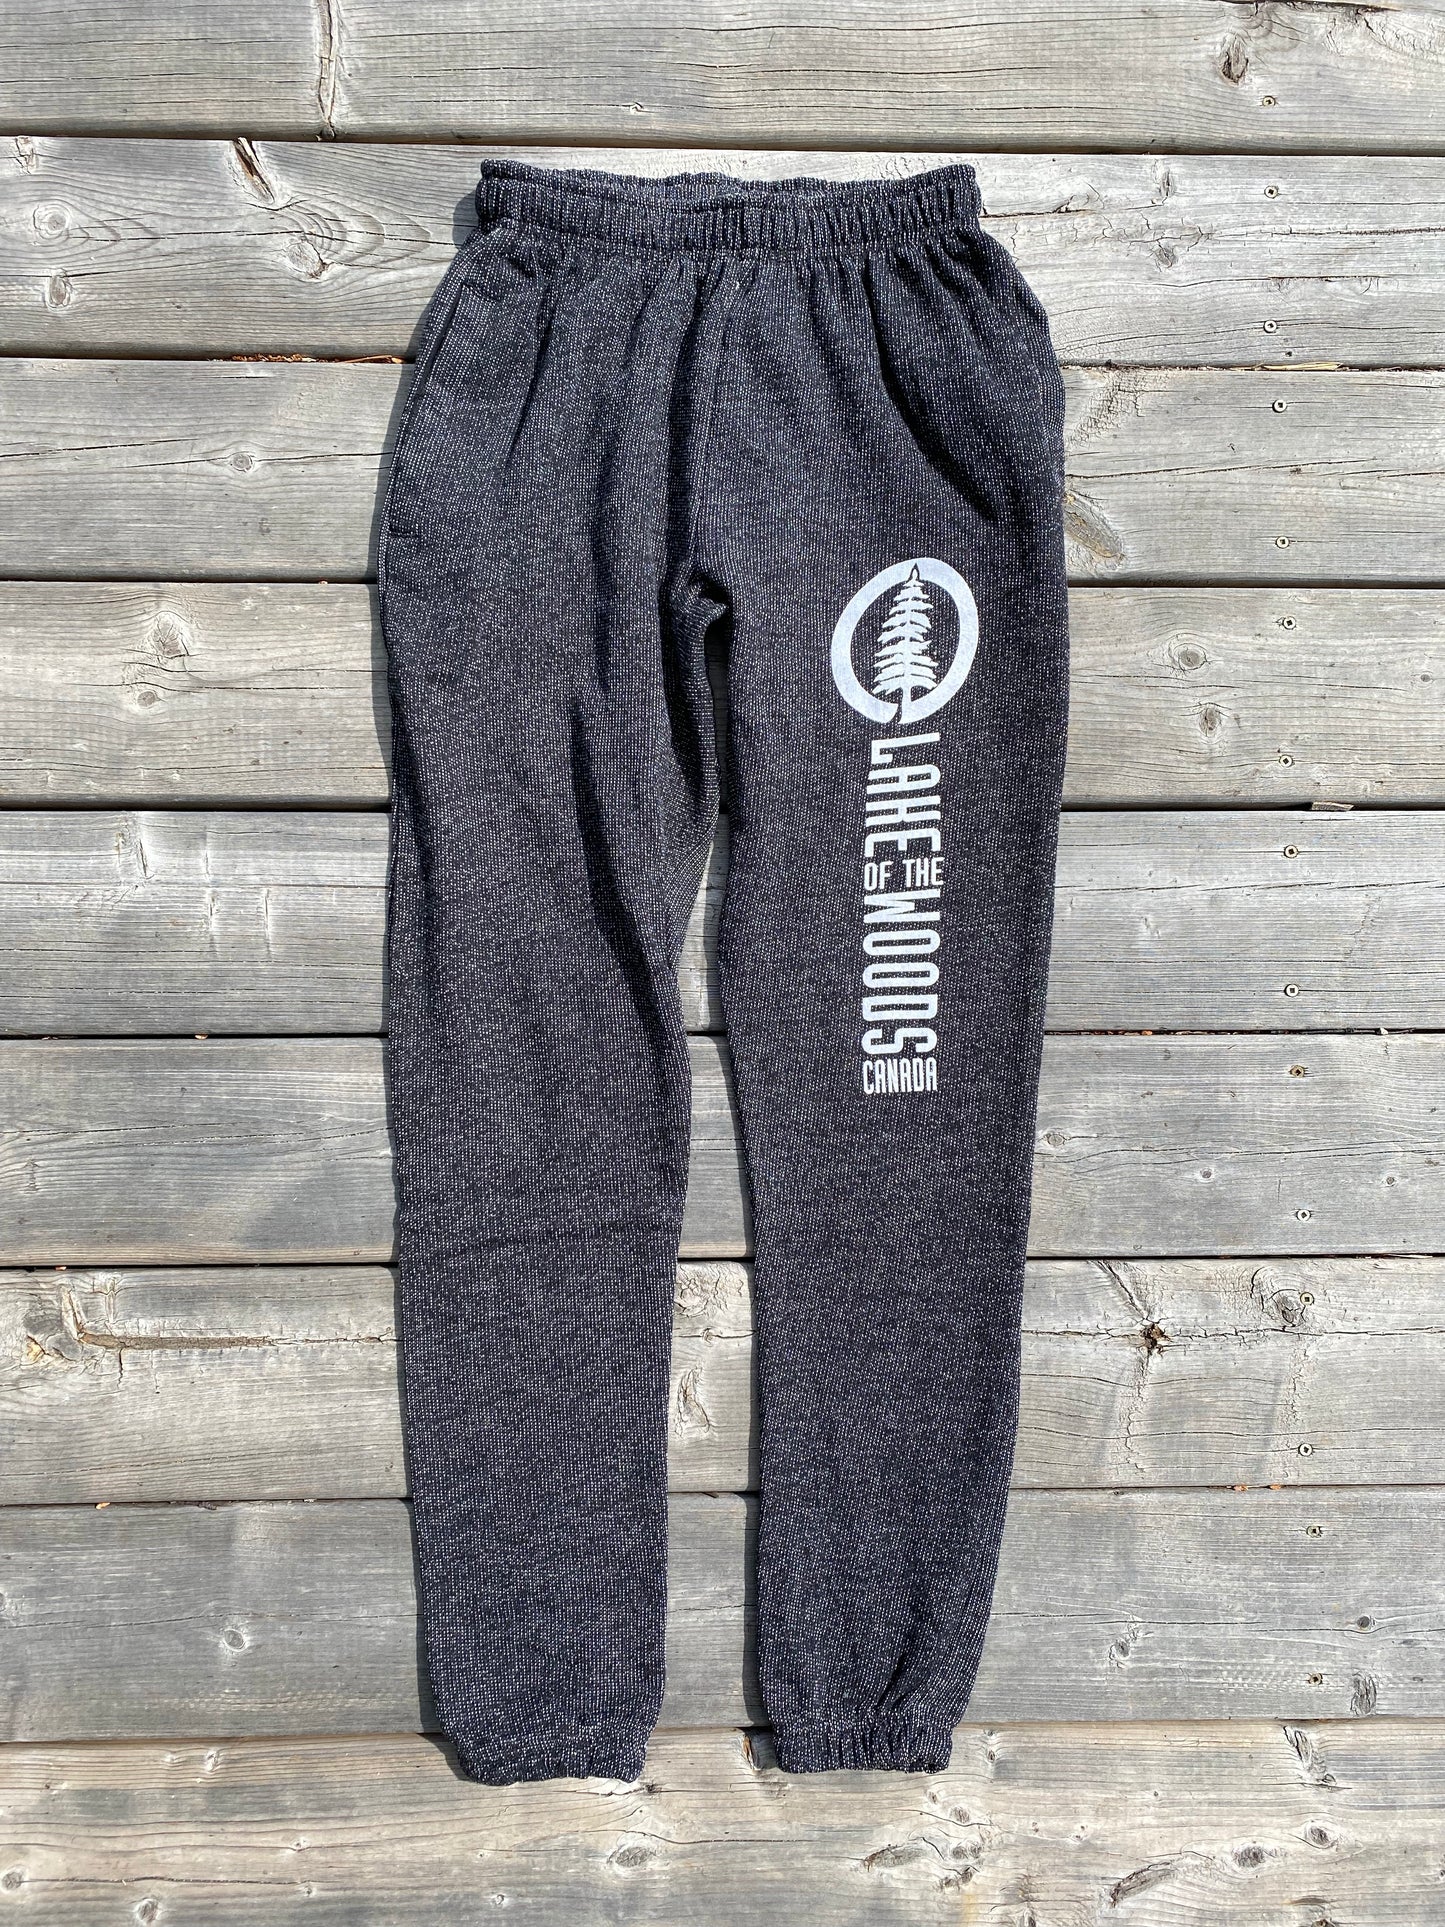 Lake of the Woods Sweat Pants in Heather Black